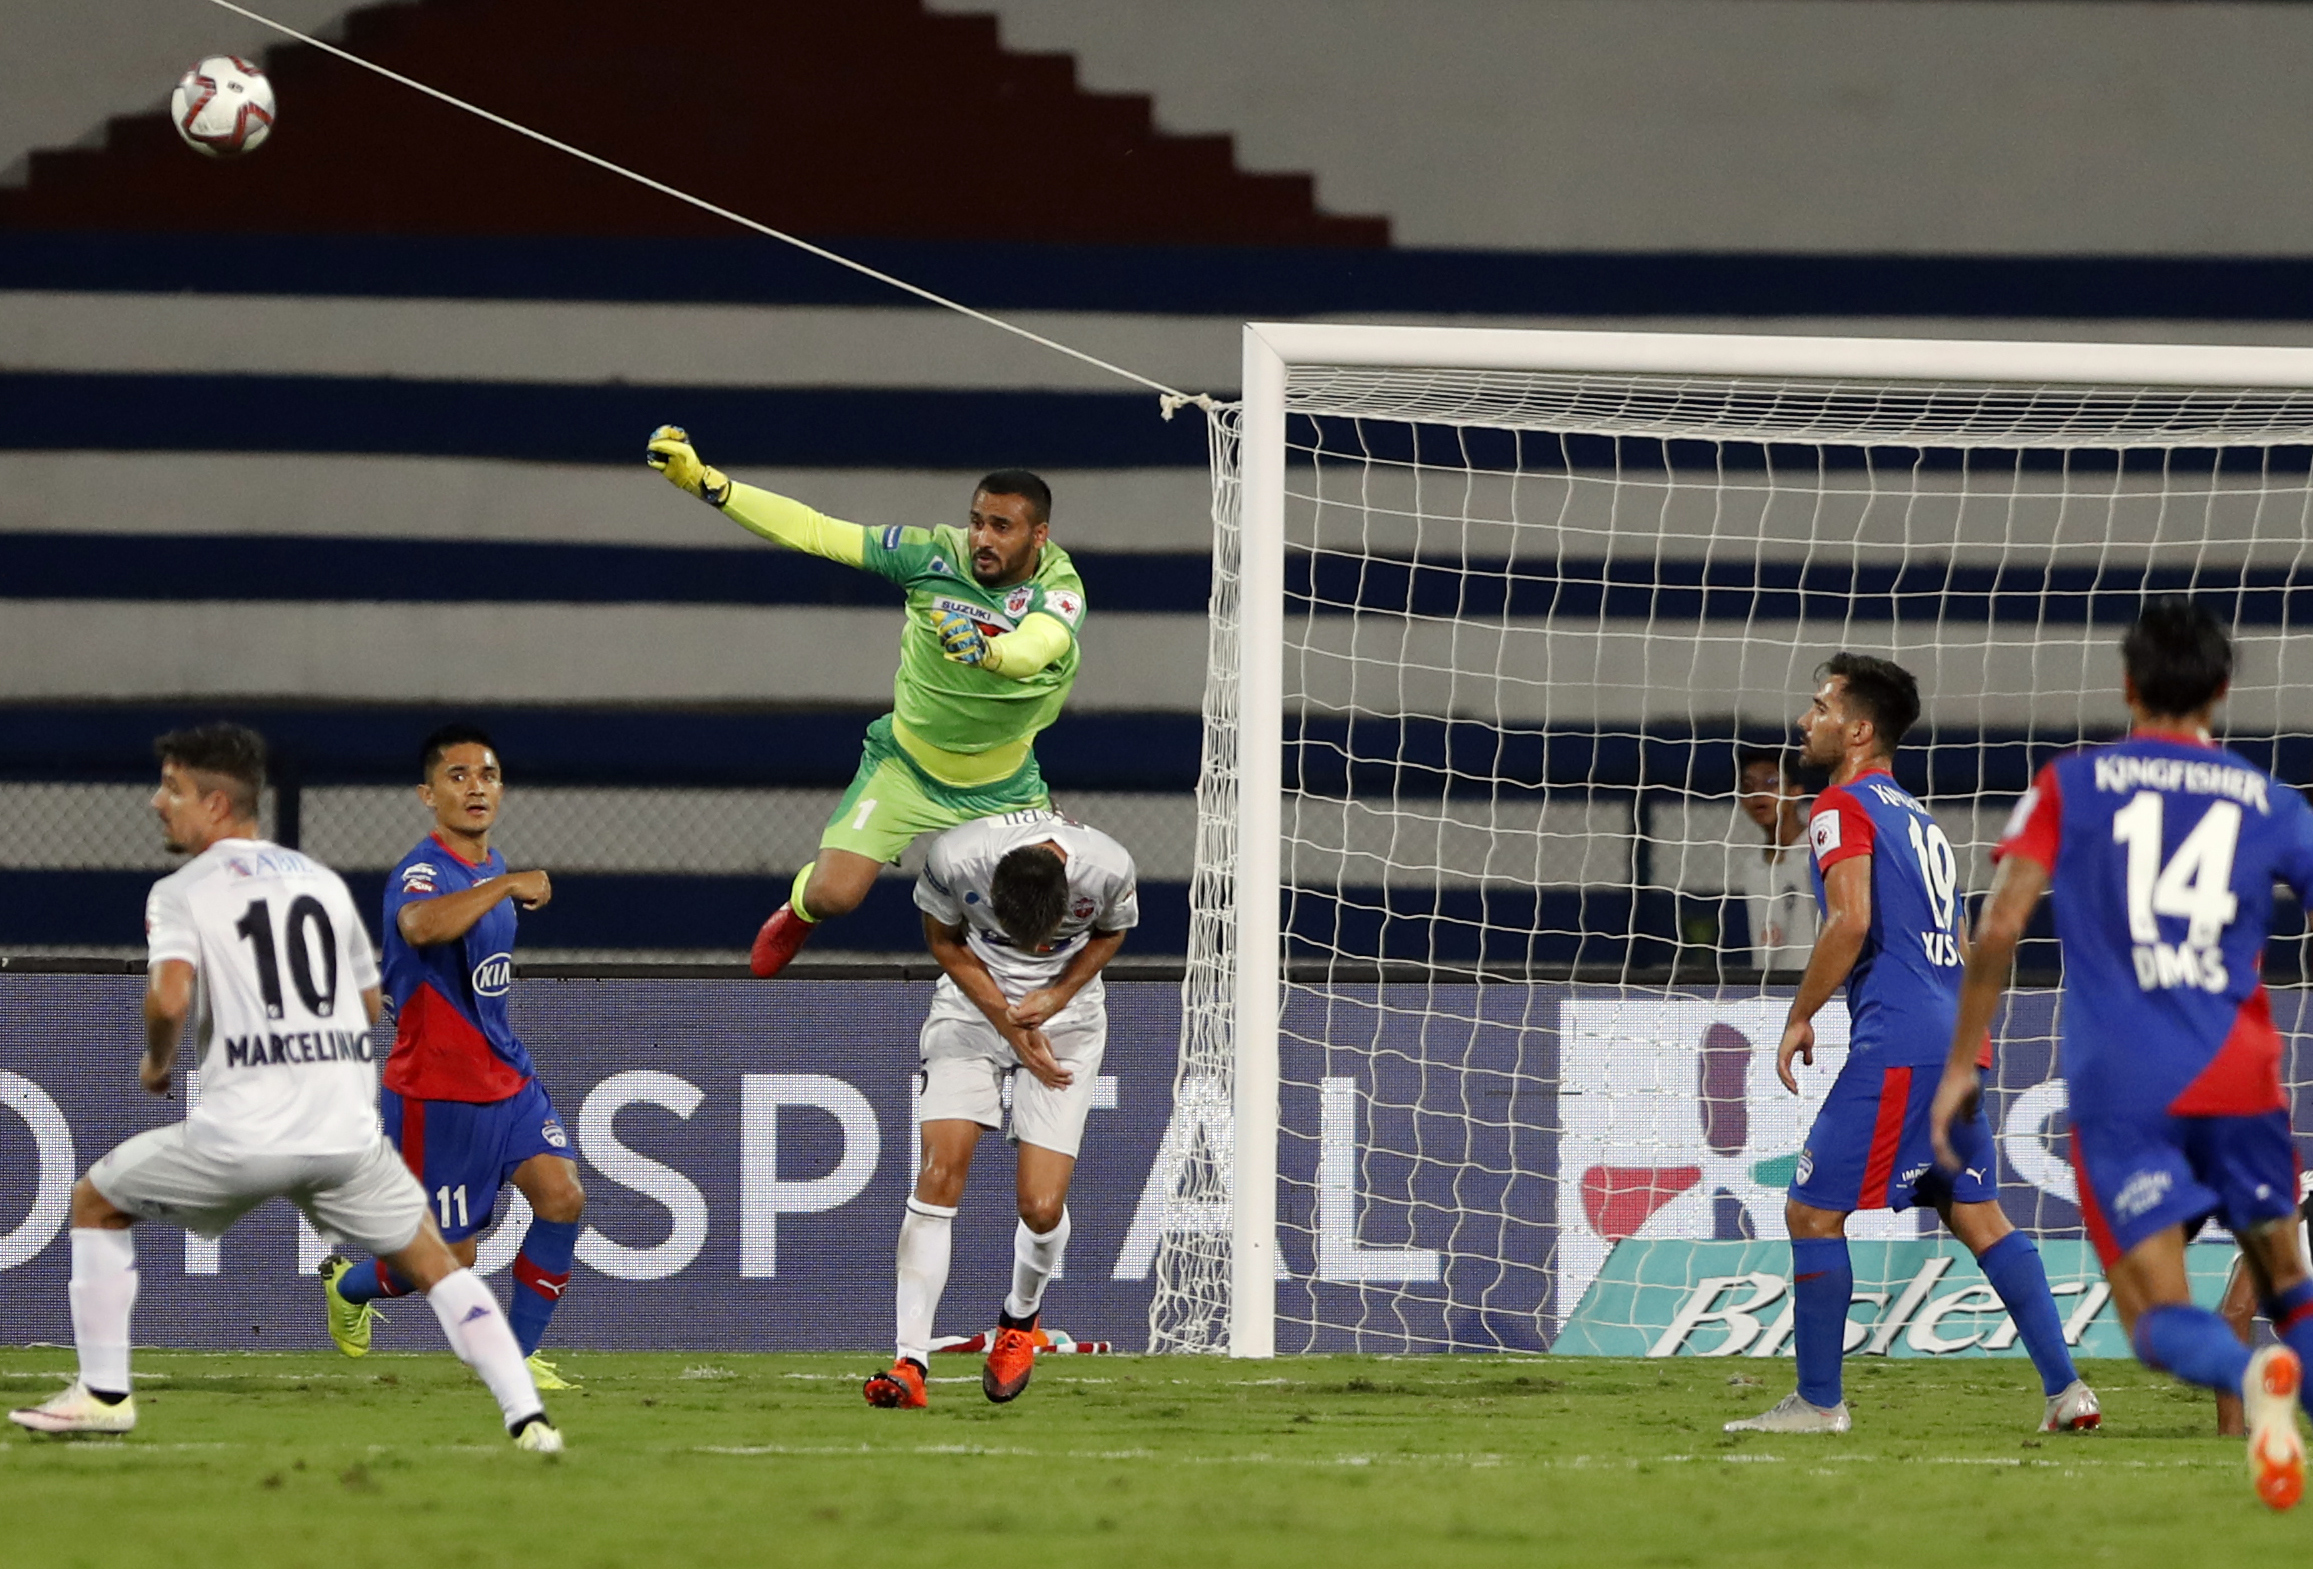 FC Pune City goalkeeper Kamaljit Singh, in green, jumps to save a goal during the Hero Indian Super League (ISL) soccer match between Bengaluru FC and FC Pune City in Bangalore - AP